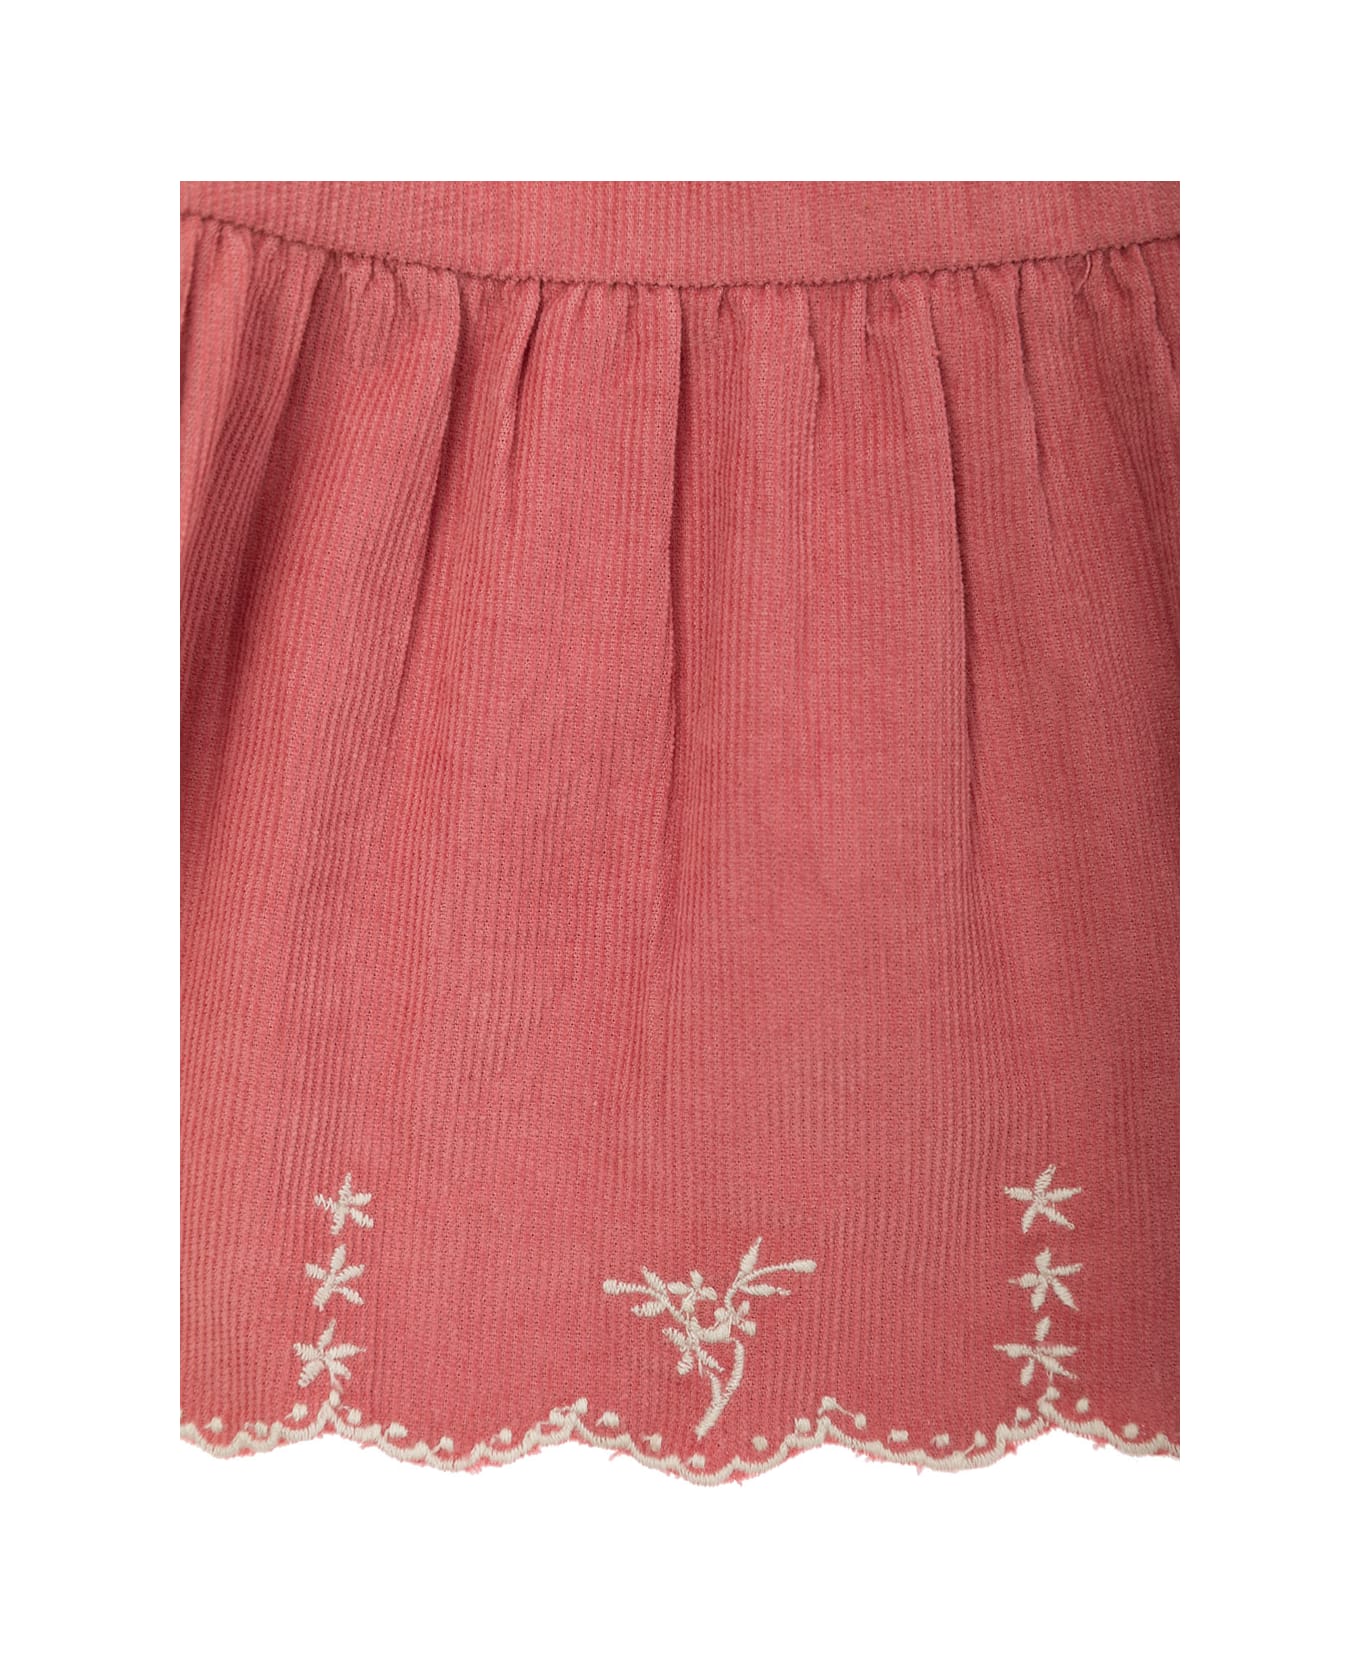 Emile Et Ida Pink Dress With Frill Detail And Embroideries In Cotton Woman - Pink ワンピース＆ドレス